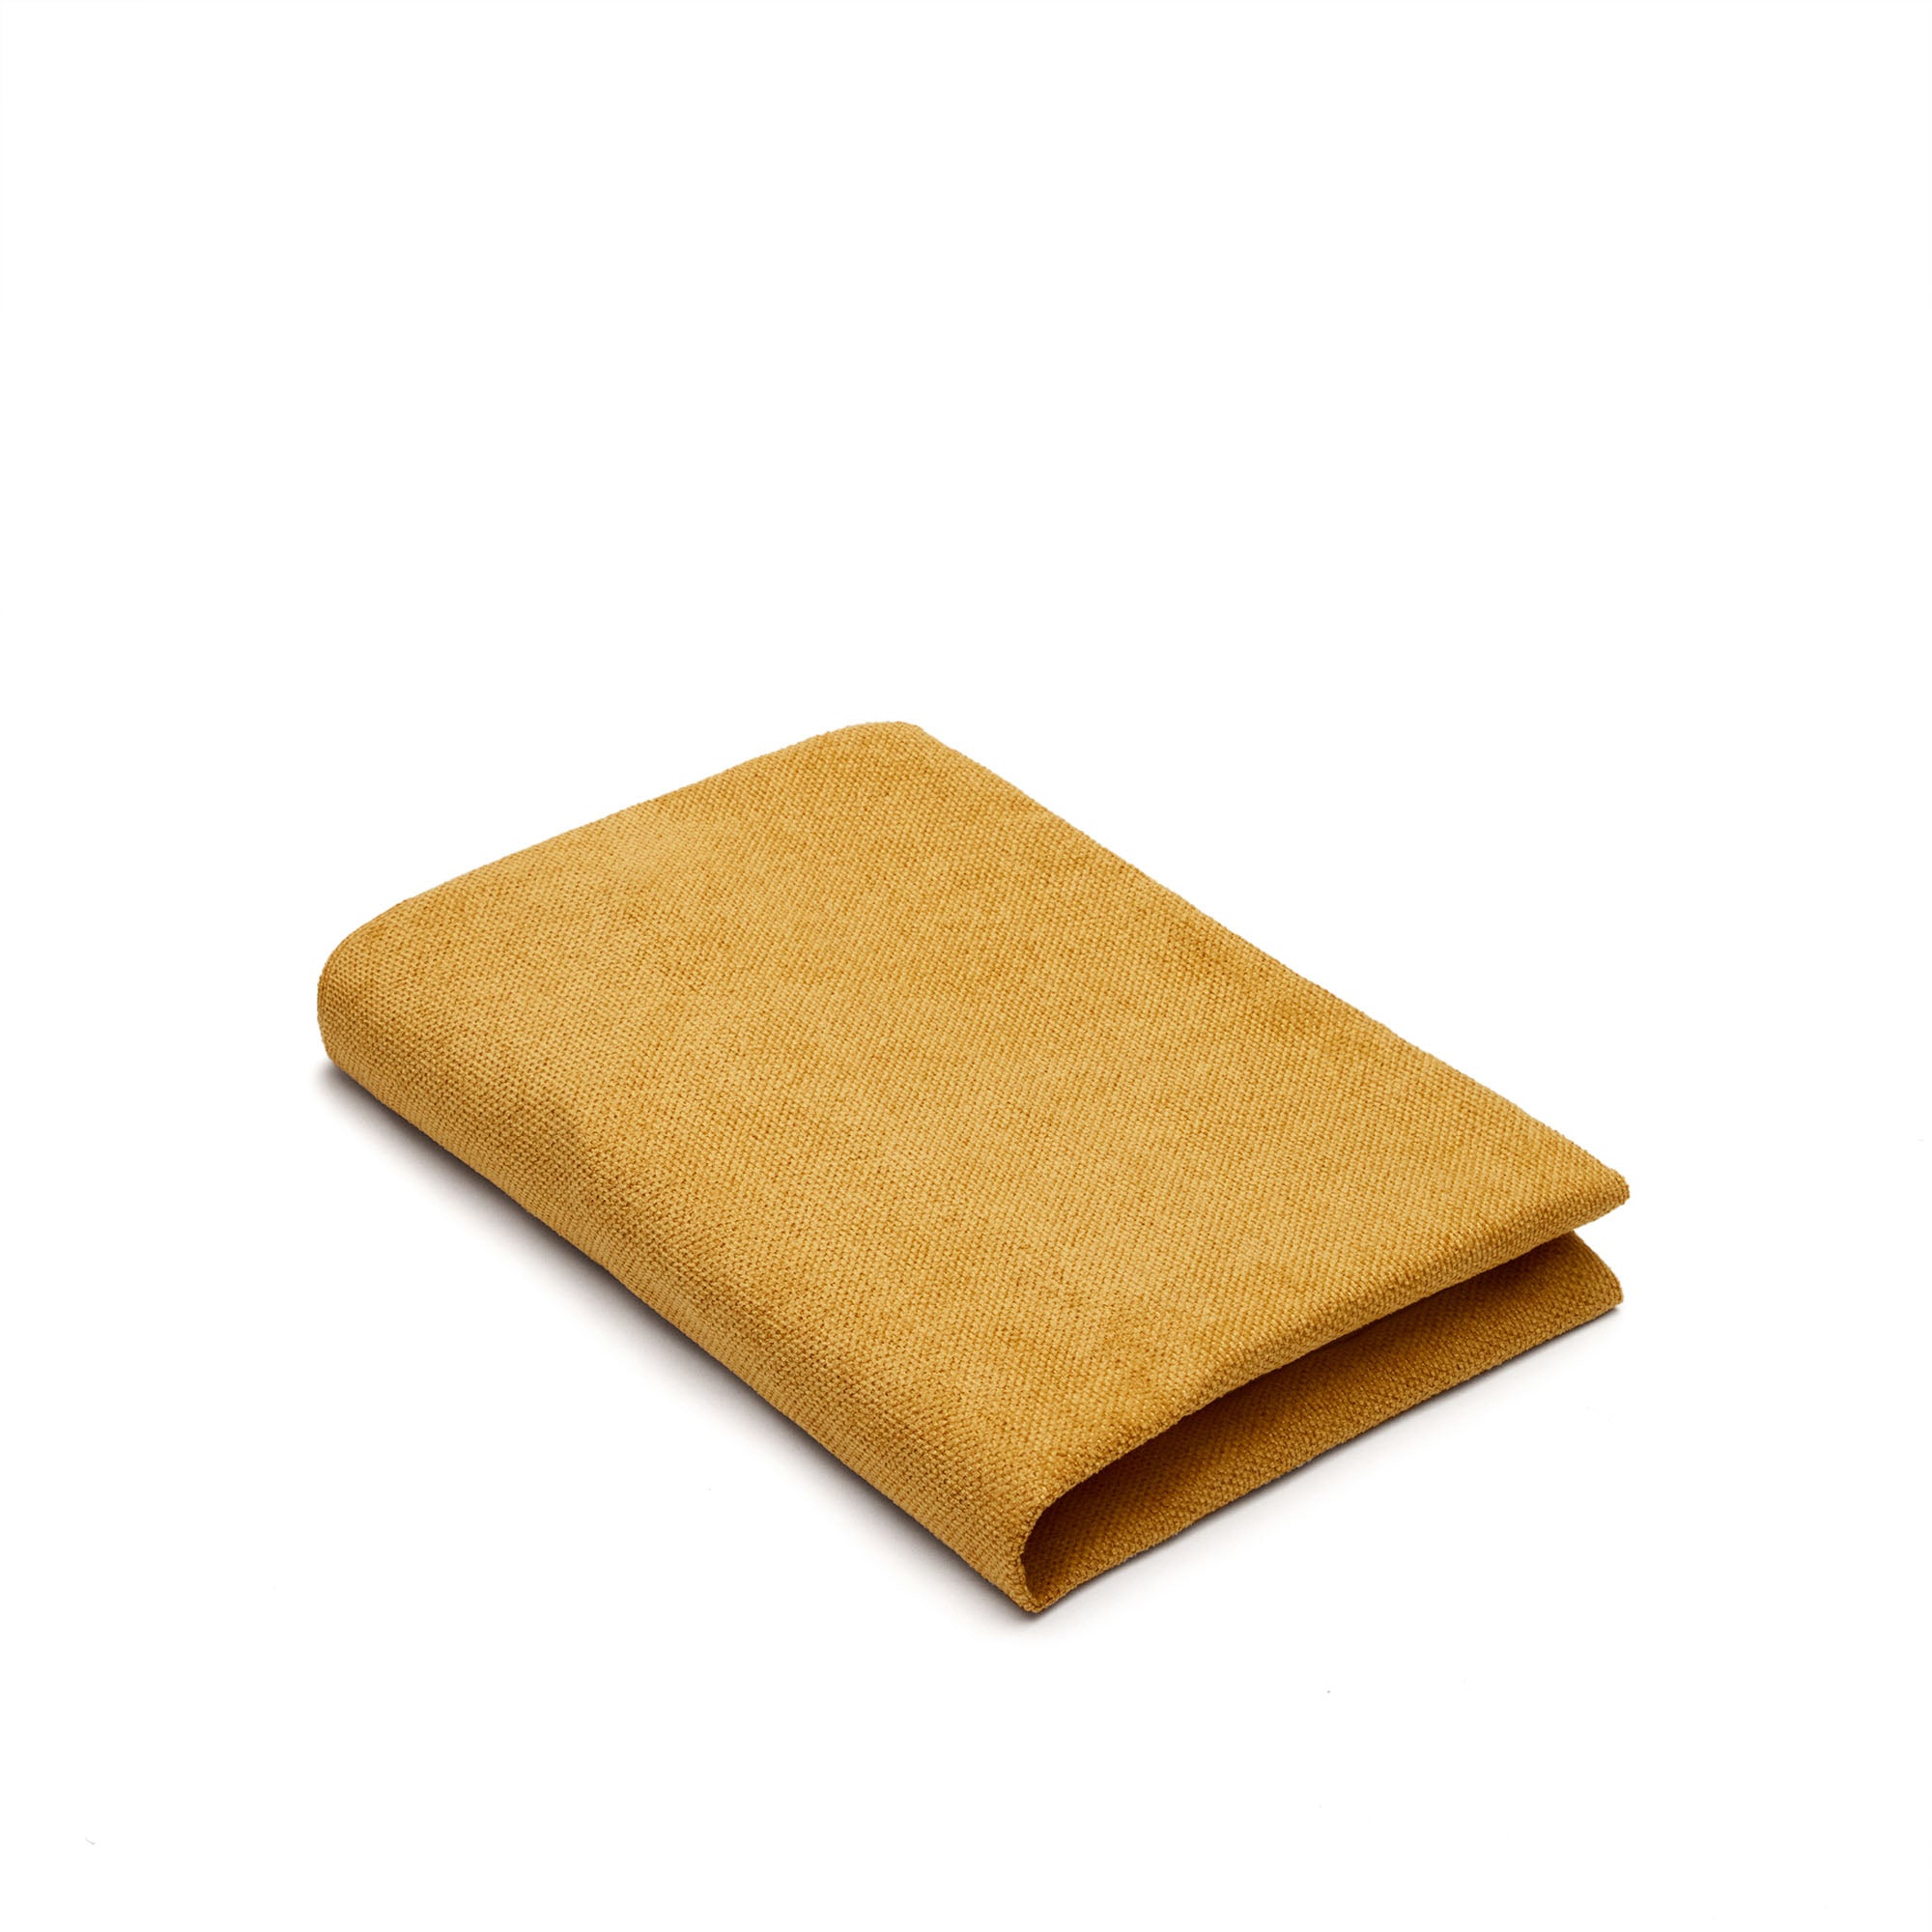 Bowie cover for large bed for pets in mustard, 73 x 98 cm